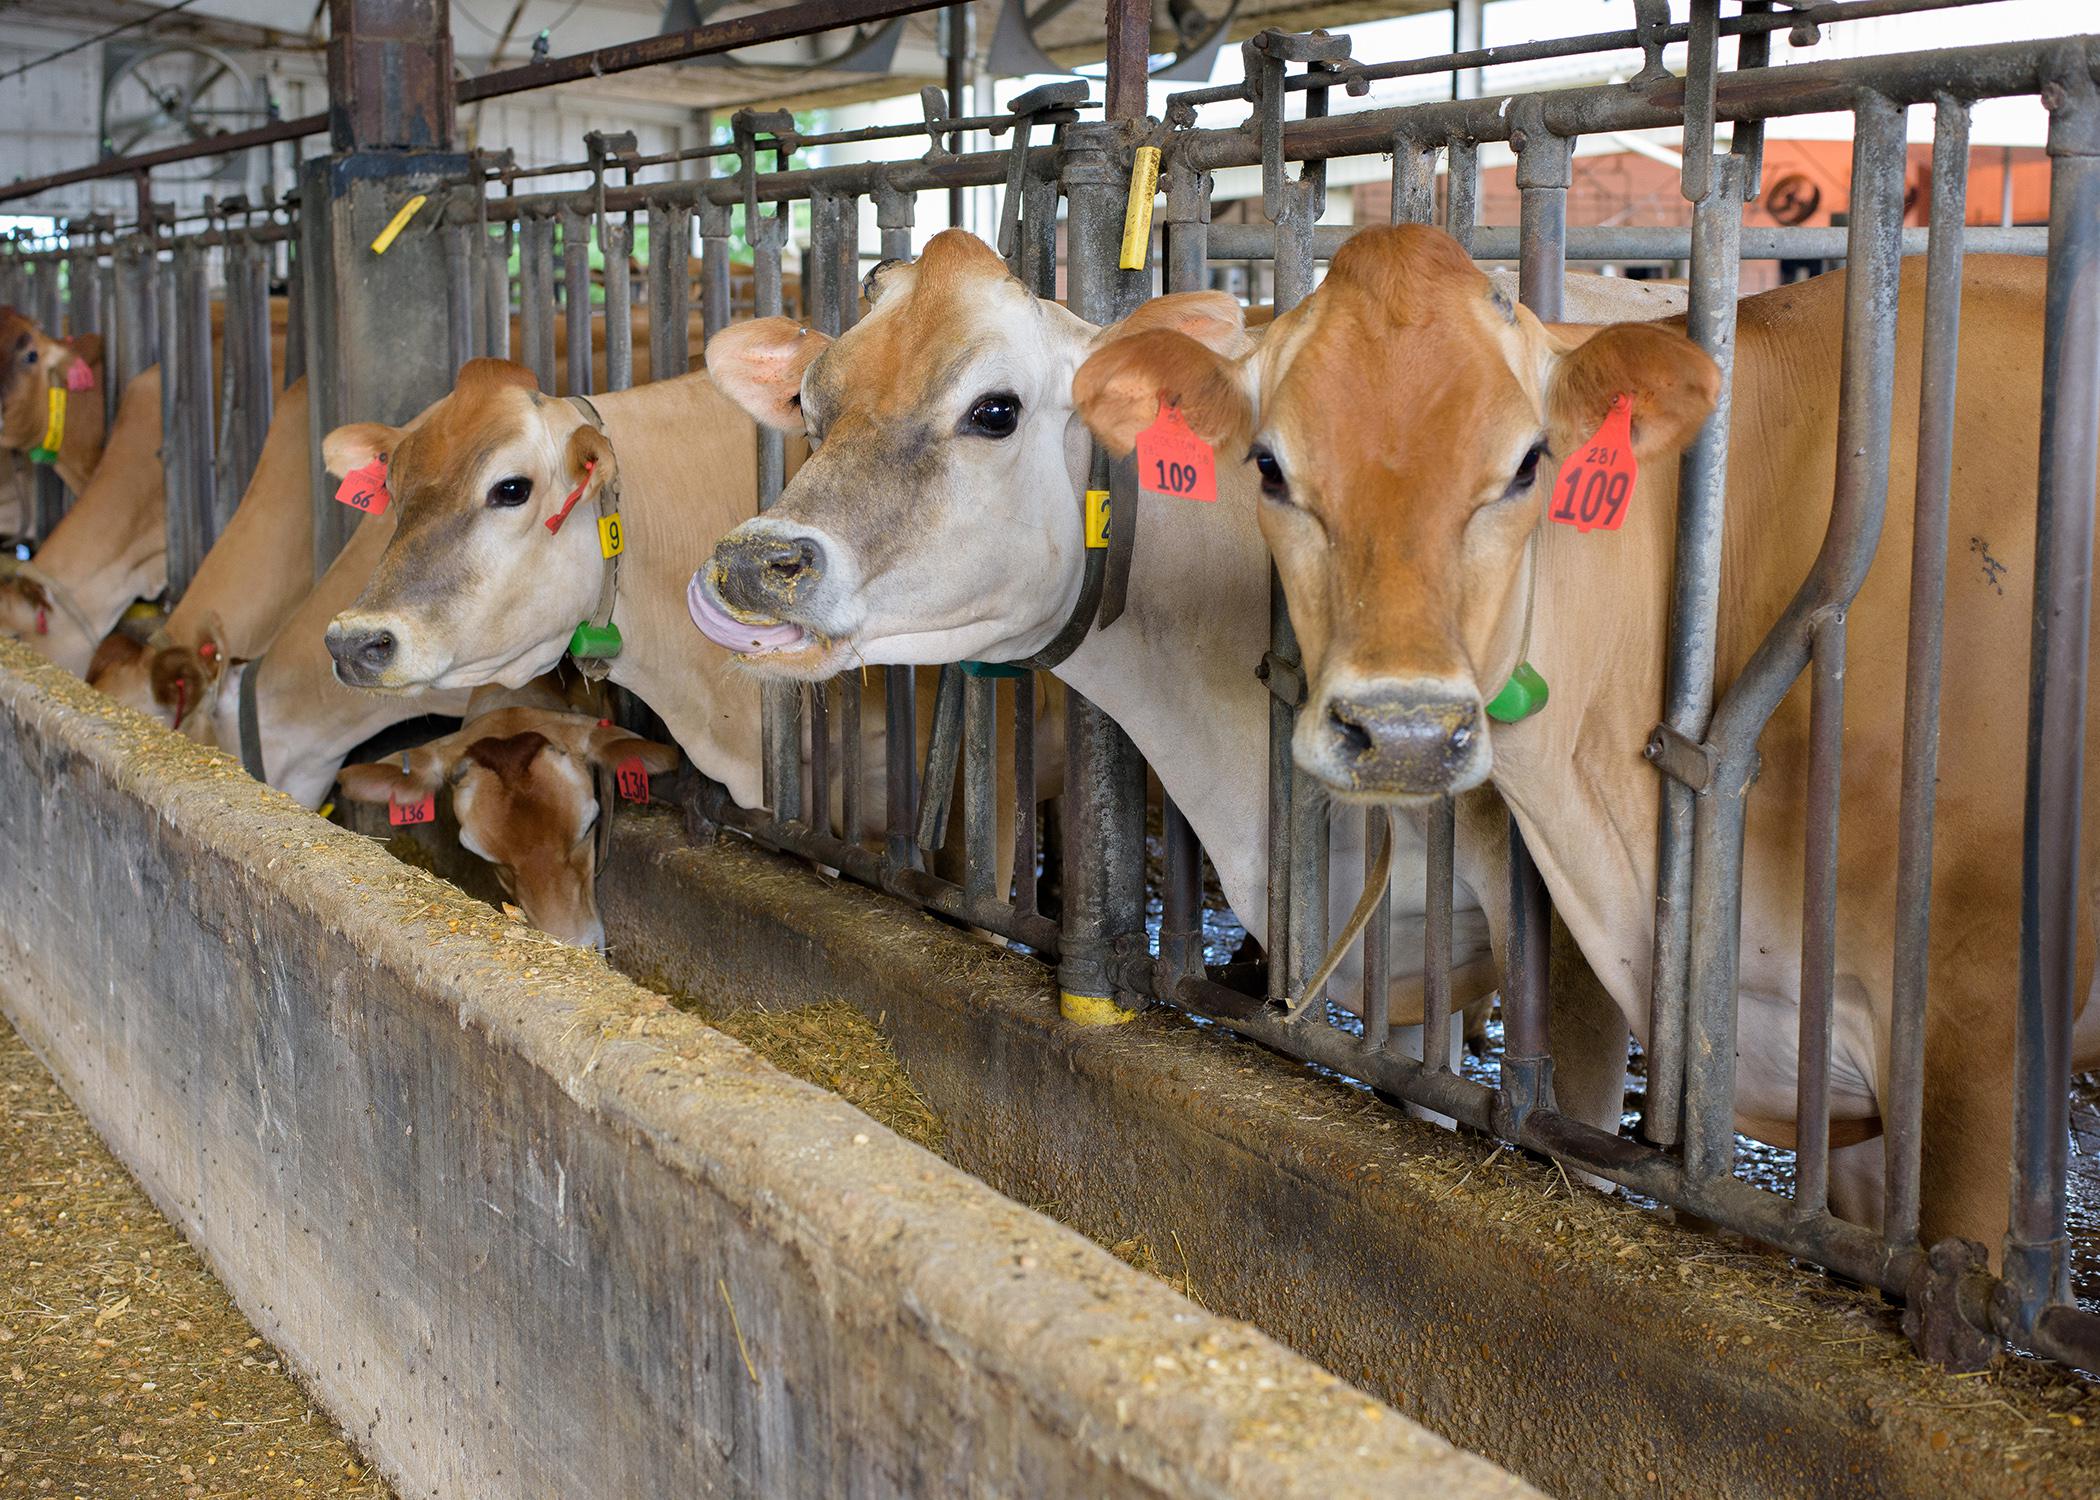  Brown cows are lined up in stalls.